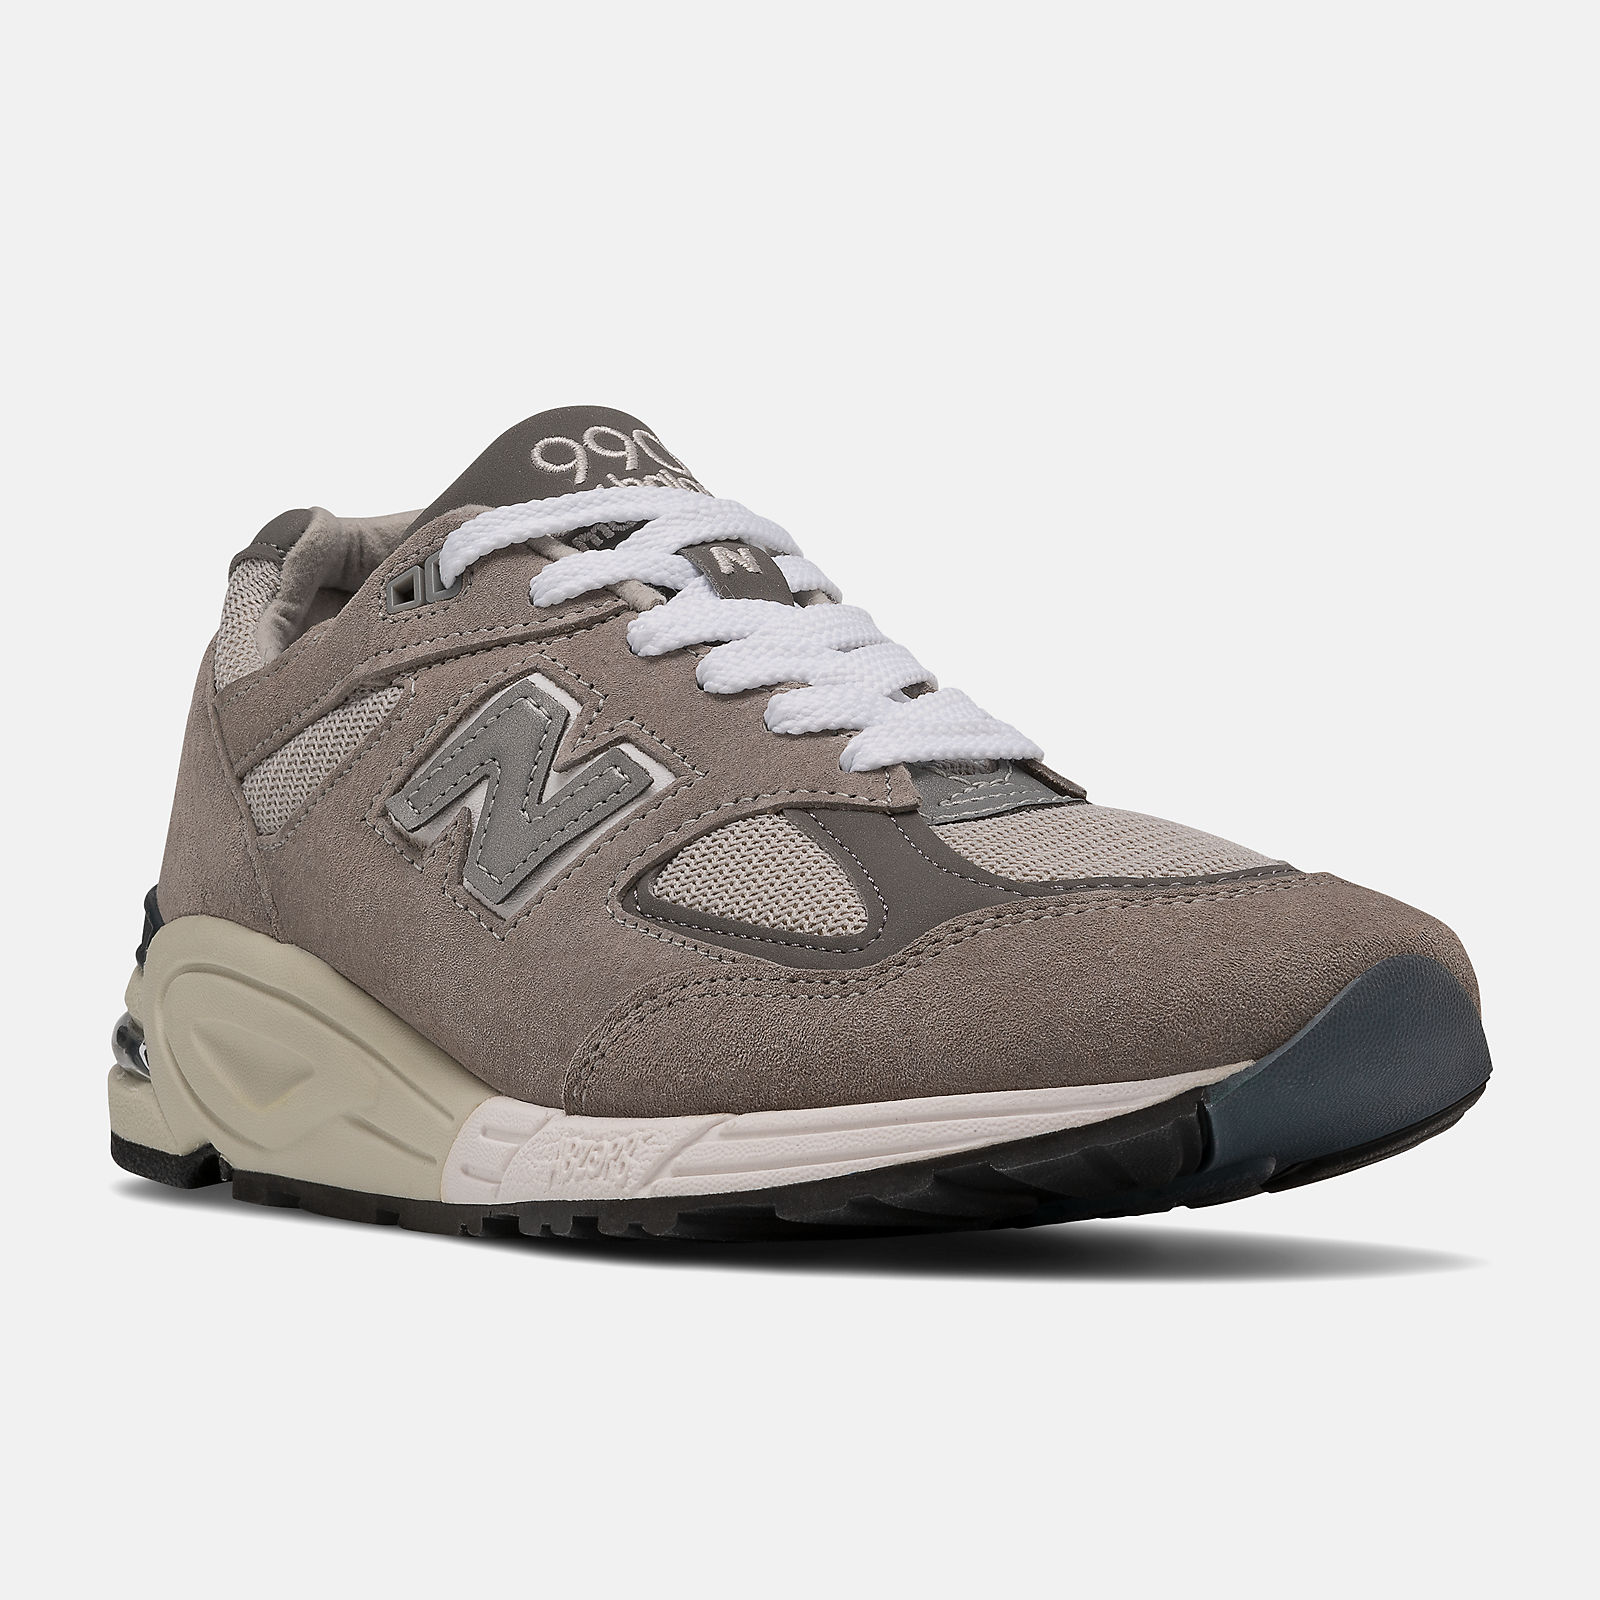 Men's Made in USA 990v2 Shoes - New Balance